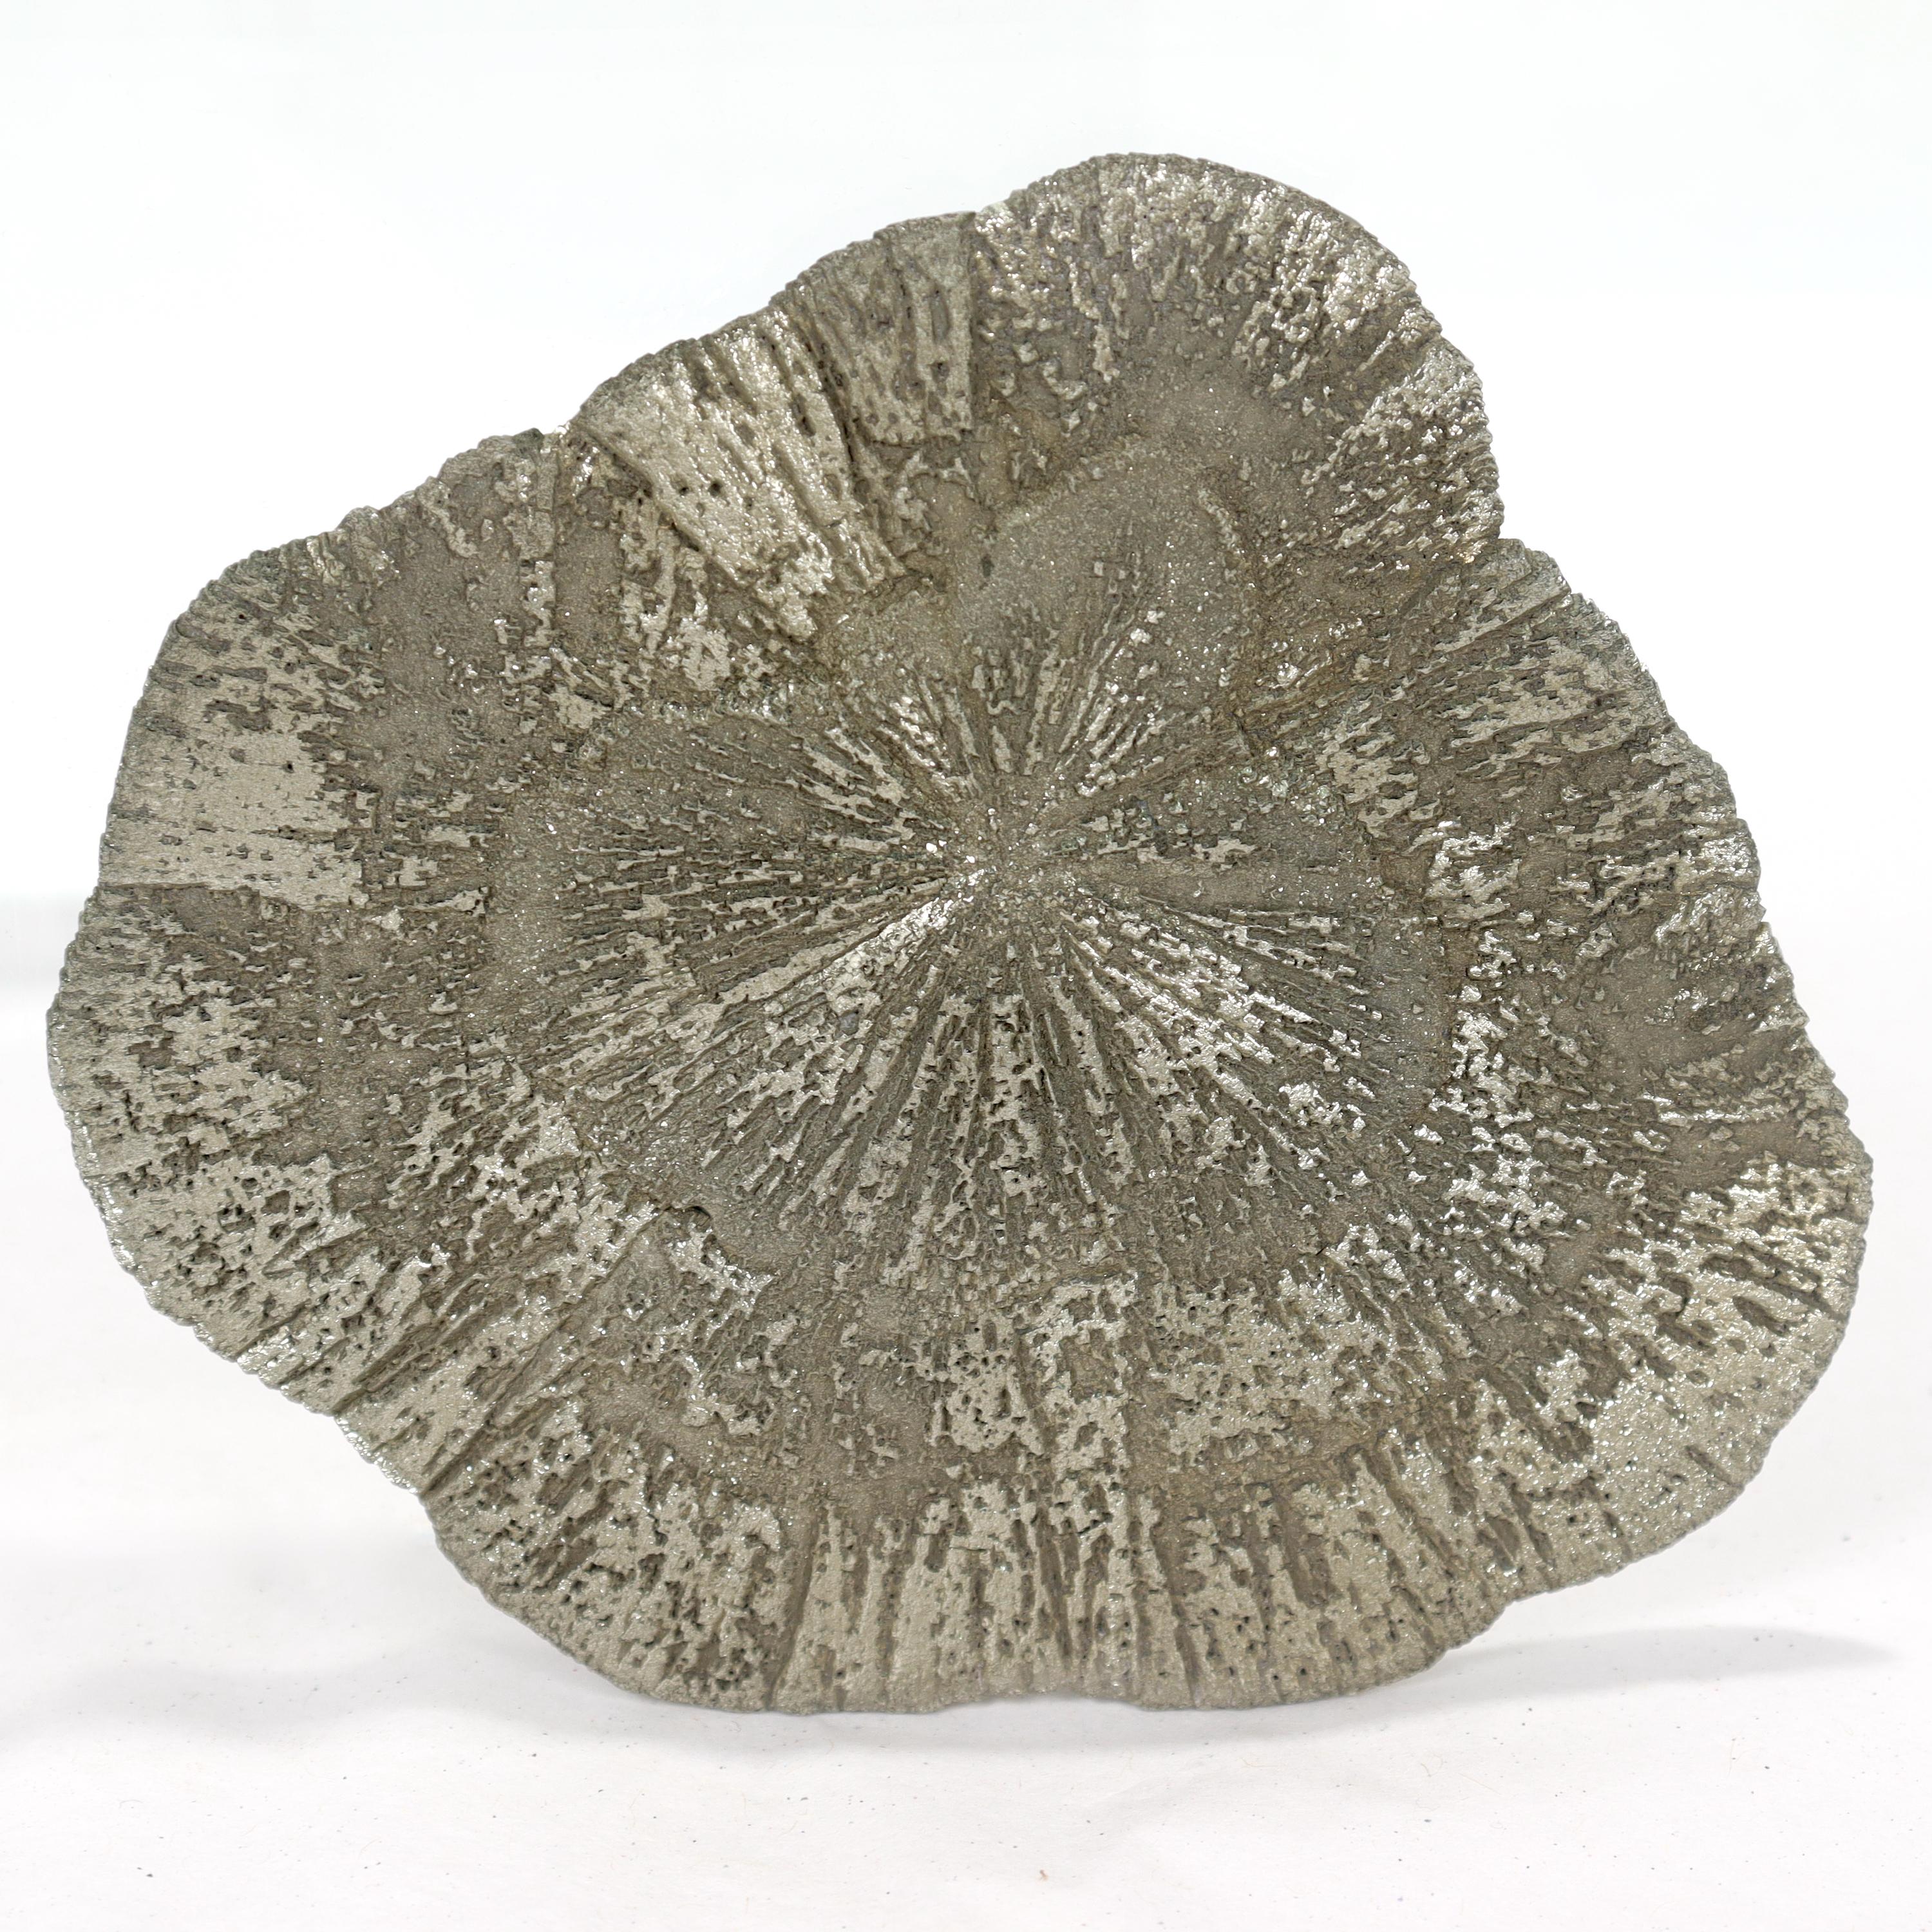 Flat Pyrite Crystal Specimen Paperweight In Good Condition For Sale In Philadelphia, PA